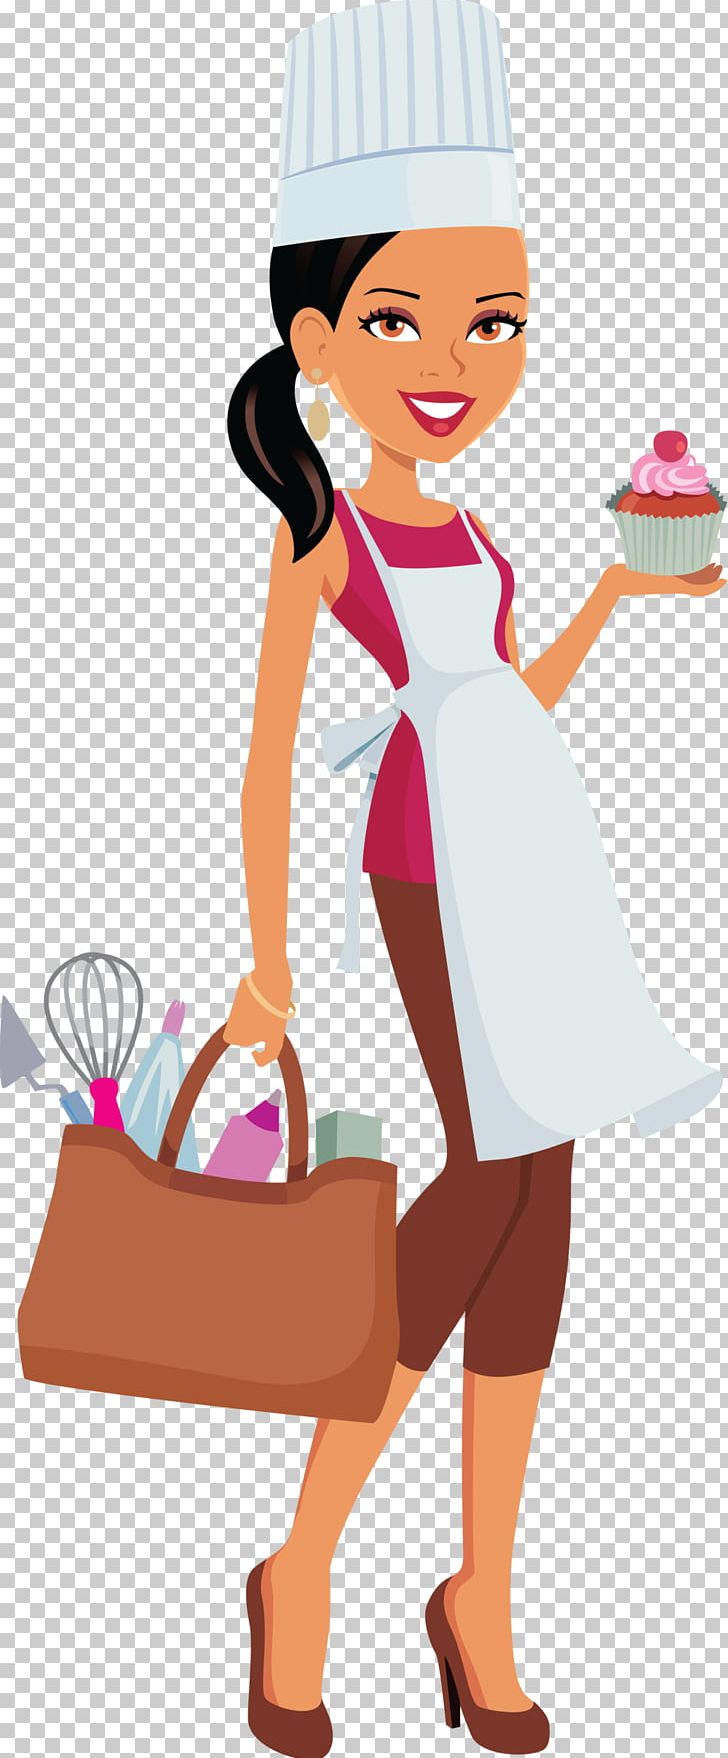 Cupcake Chef Woman PNG, Clipart, Arm, Baker, Baking, Cartoon, Chef Free PNG Download